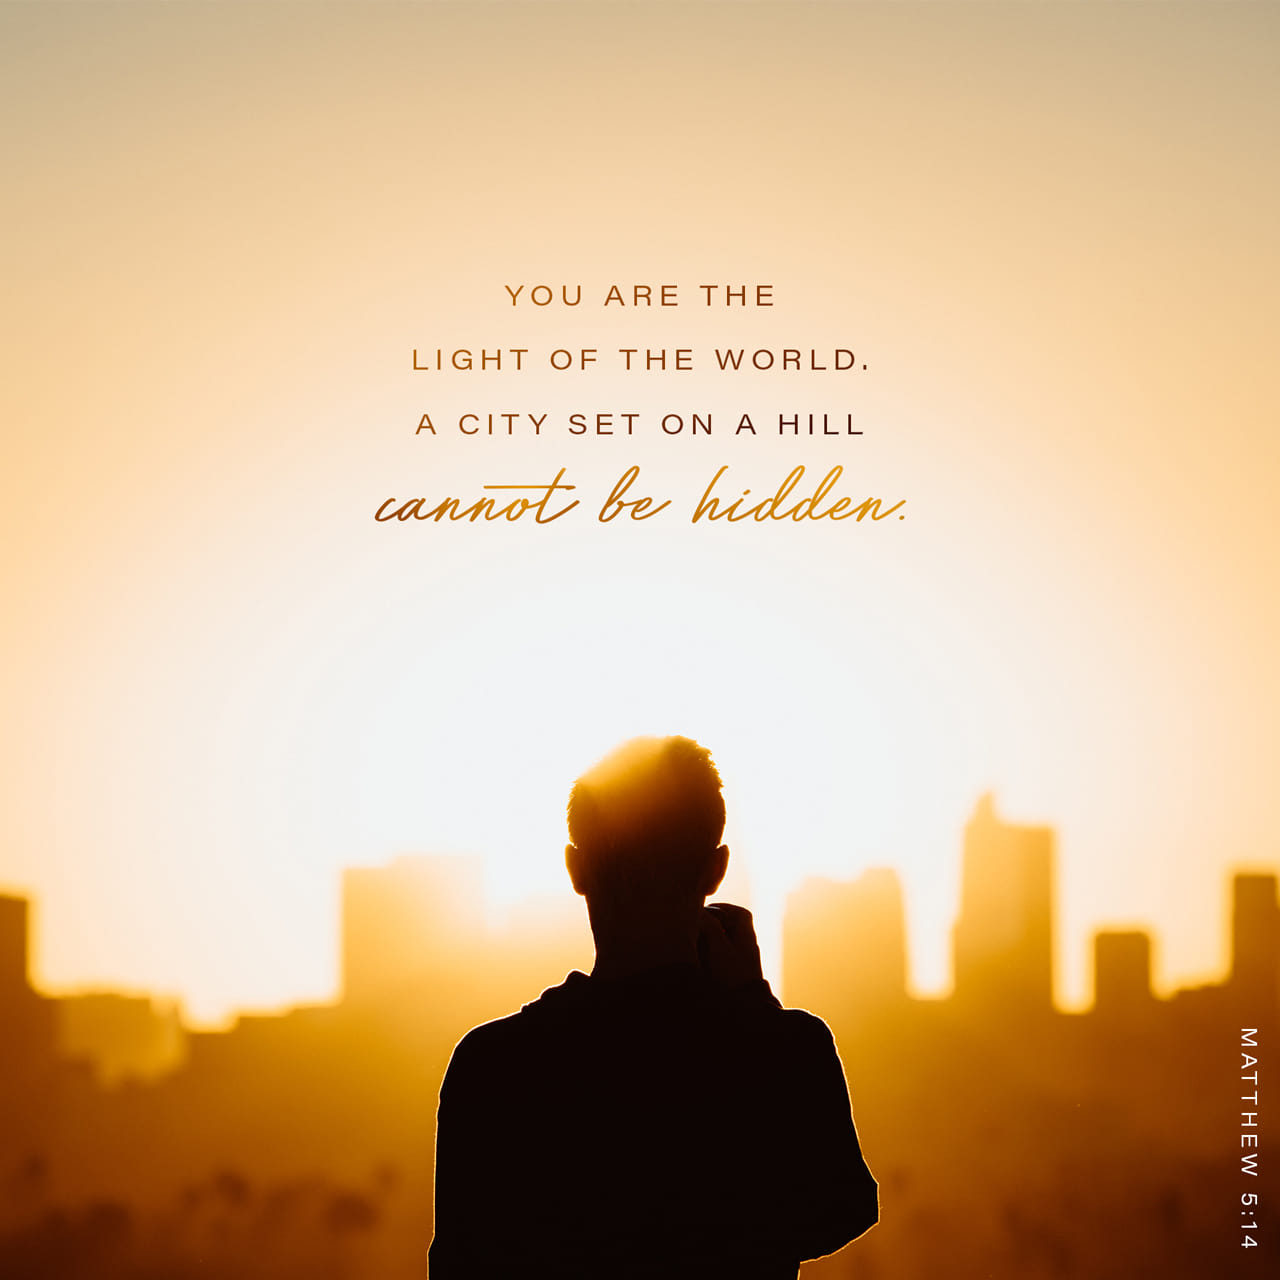 You are the light of the world, A city on a hill cannot be hidden